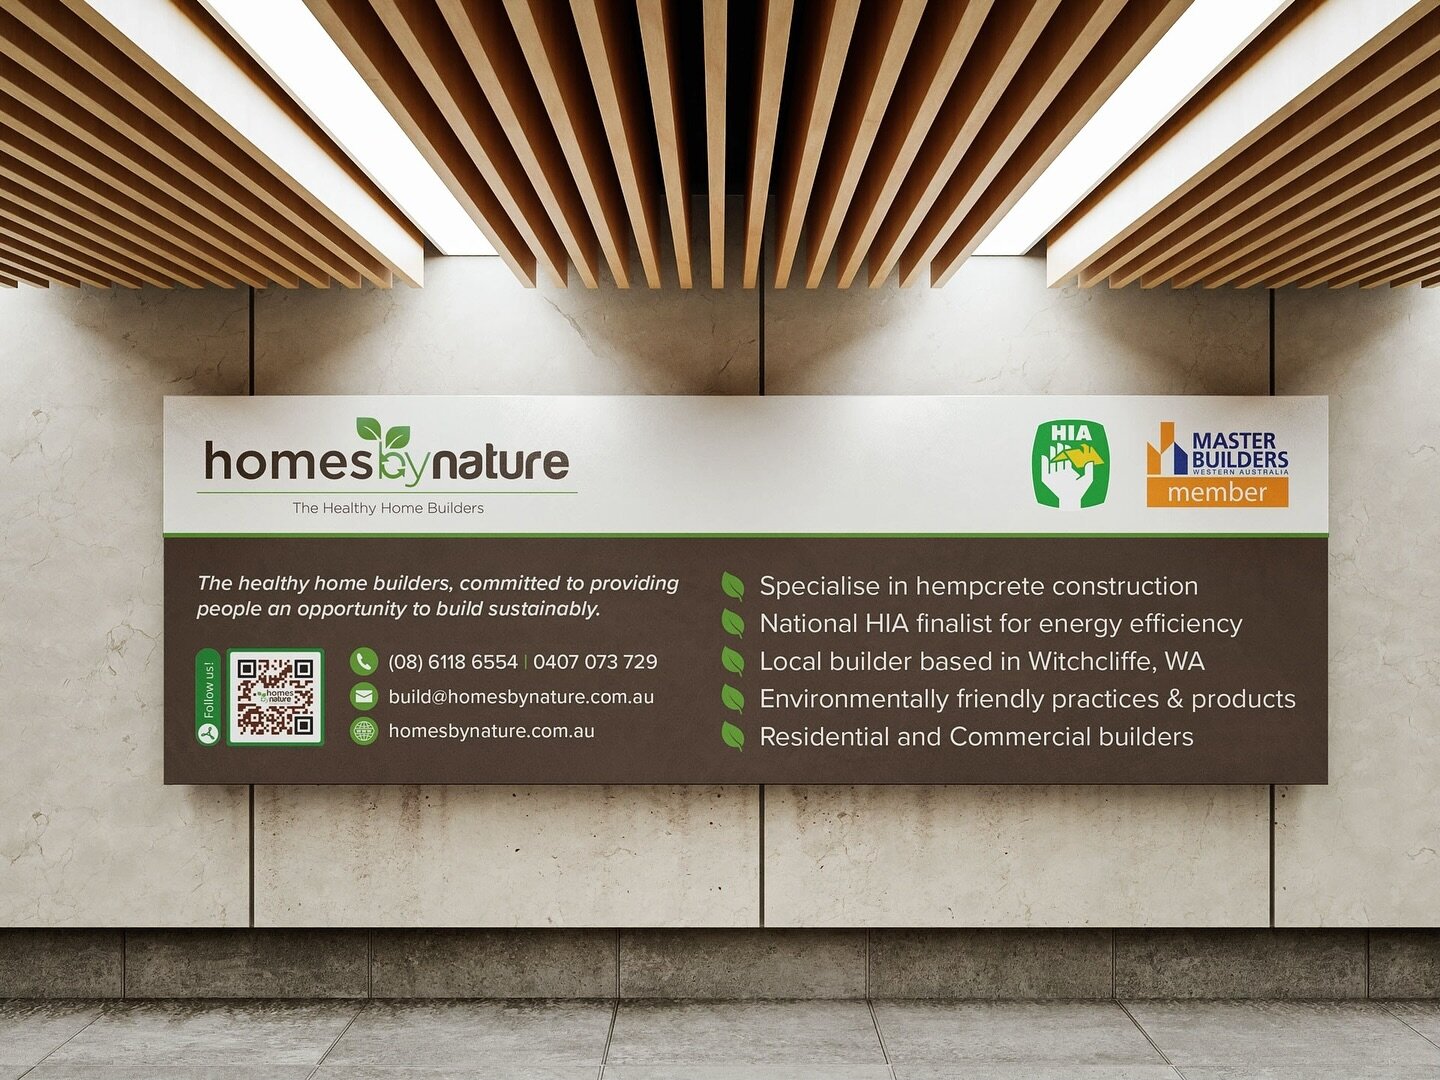 Signage design for Homes By Nature!
#sign #signs #signage #signmaking #signagedesign #advertising #billboard #billboards #billboarddesign #hempcretebuilder #energyefficiency #localbuilder #sustainablebuilding #sustainableconstruction